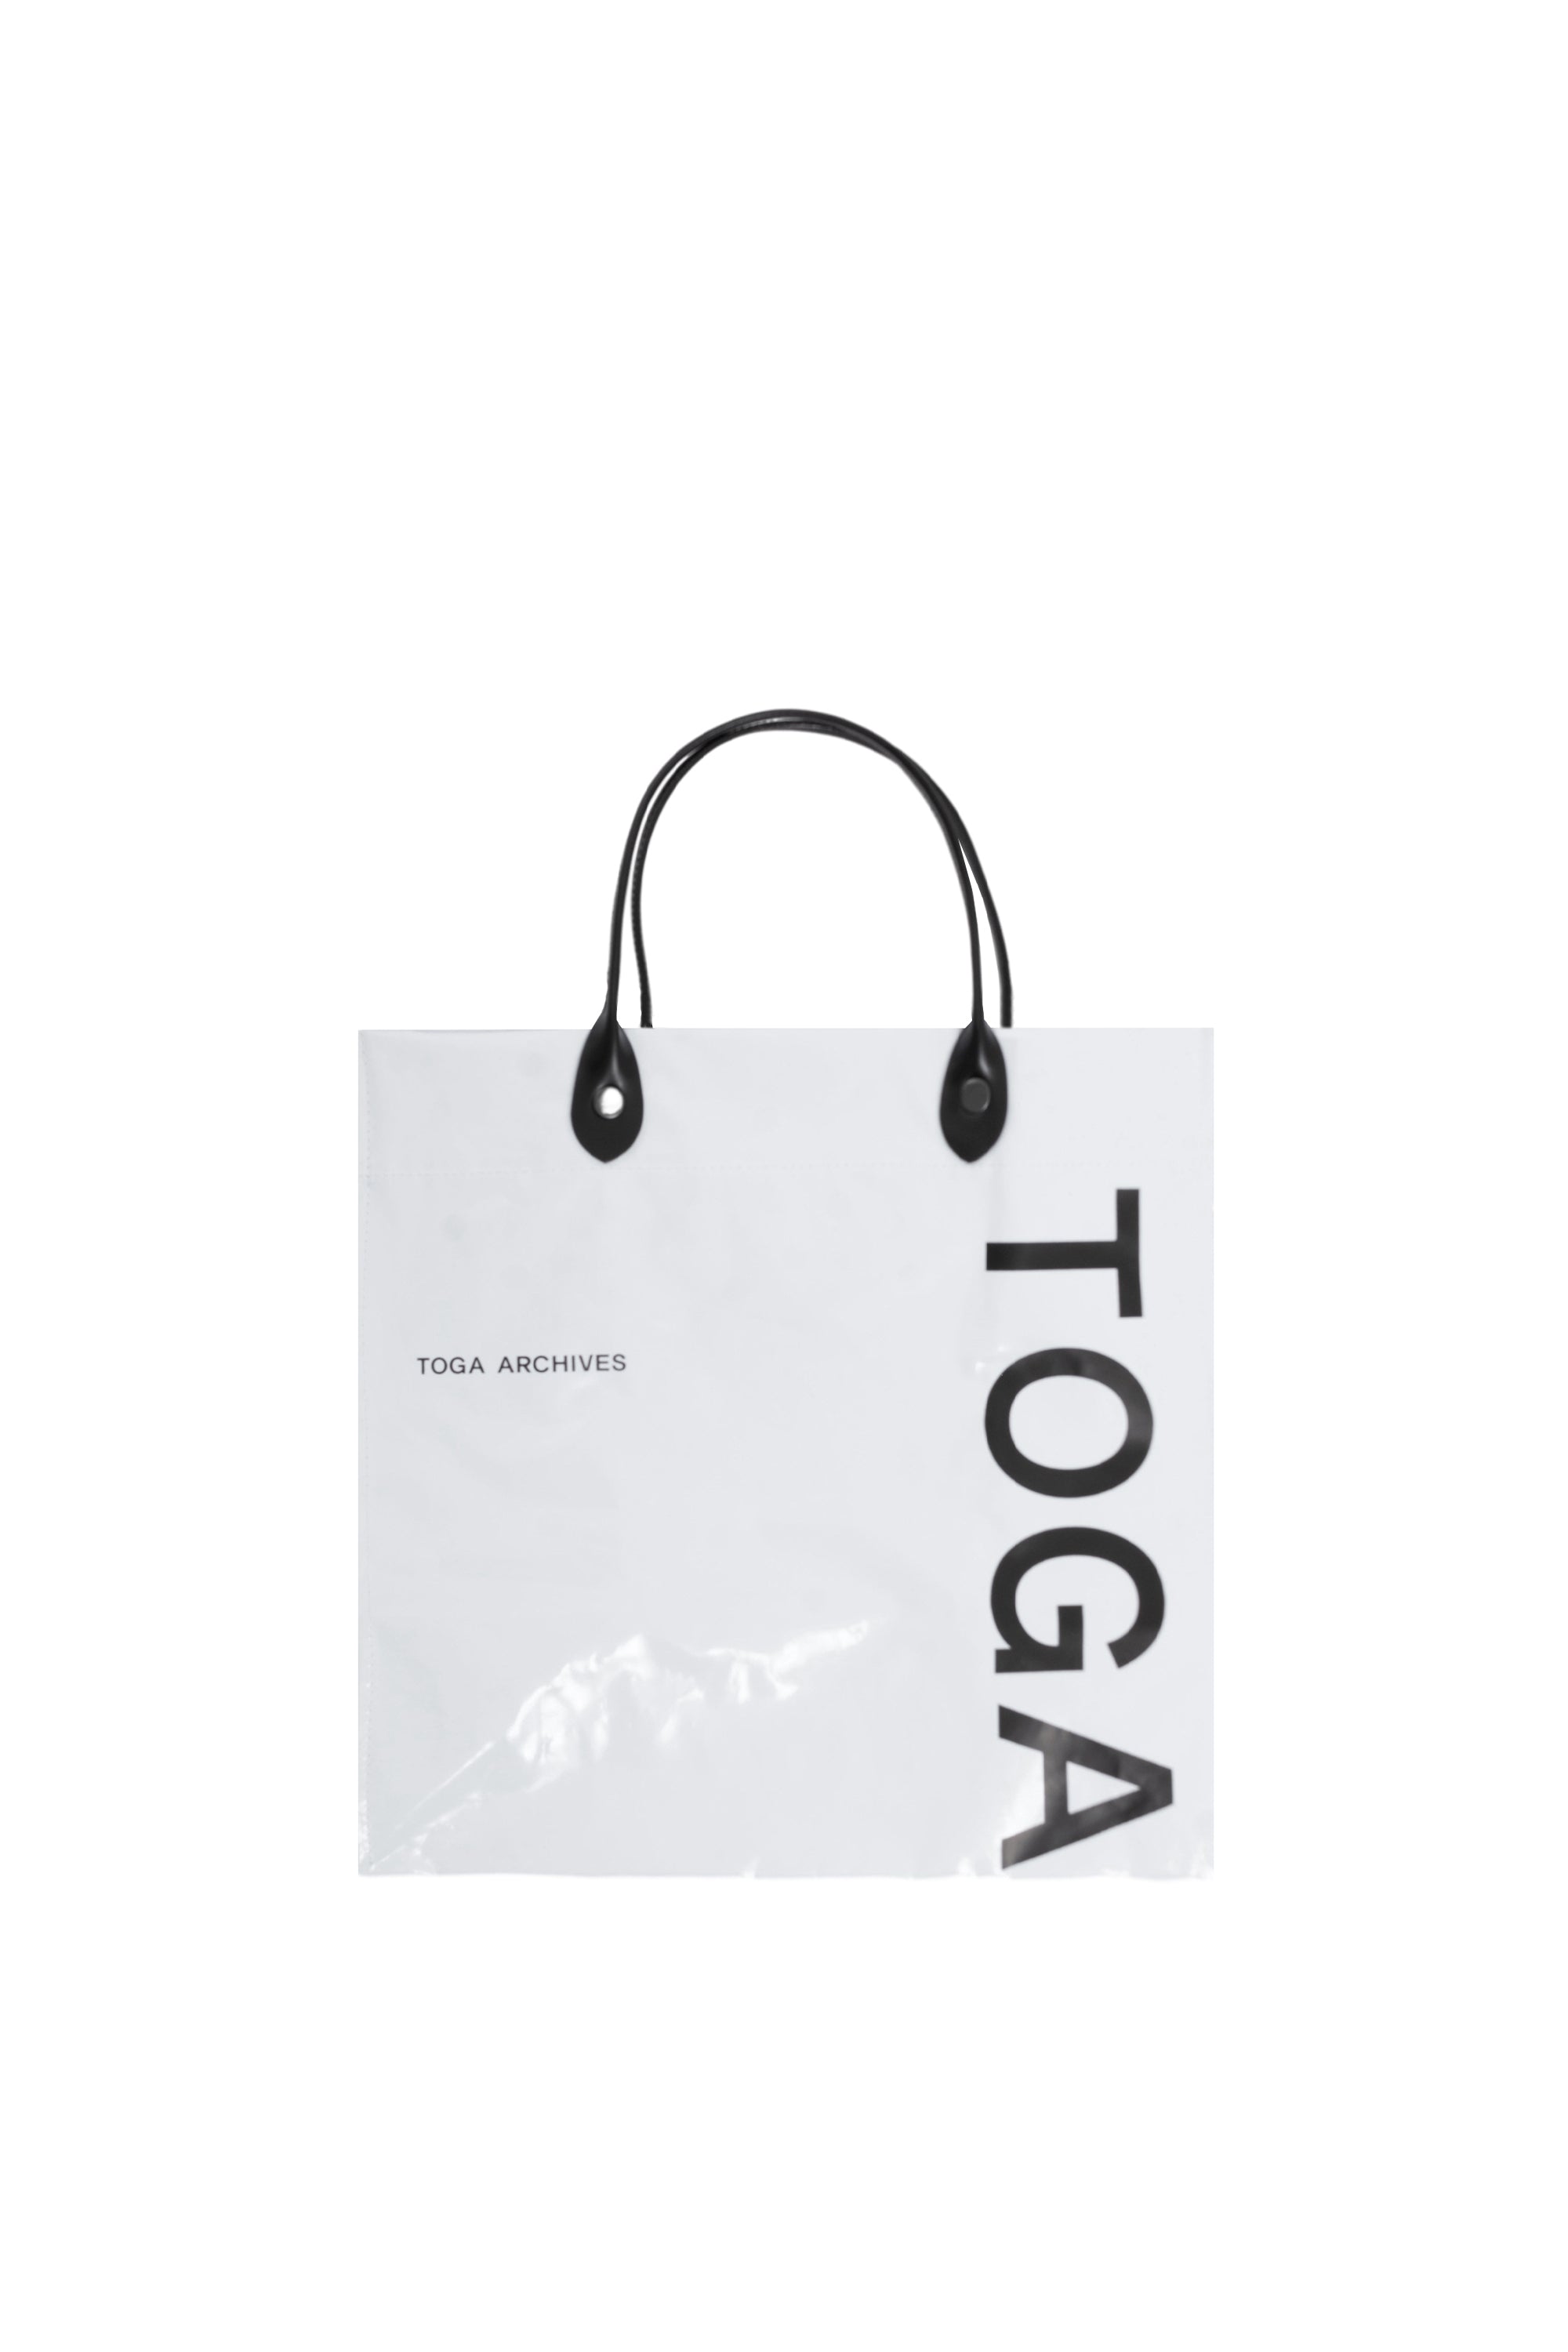 TOGA ARCHIVES トーガ アーカイブス FW23 TOGA LOGO TOTE BAG SMALL